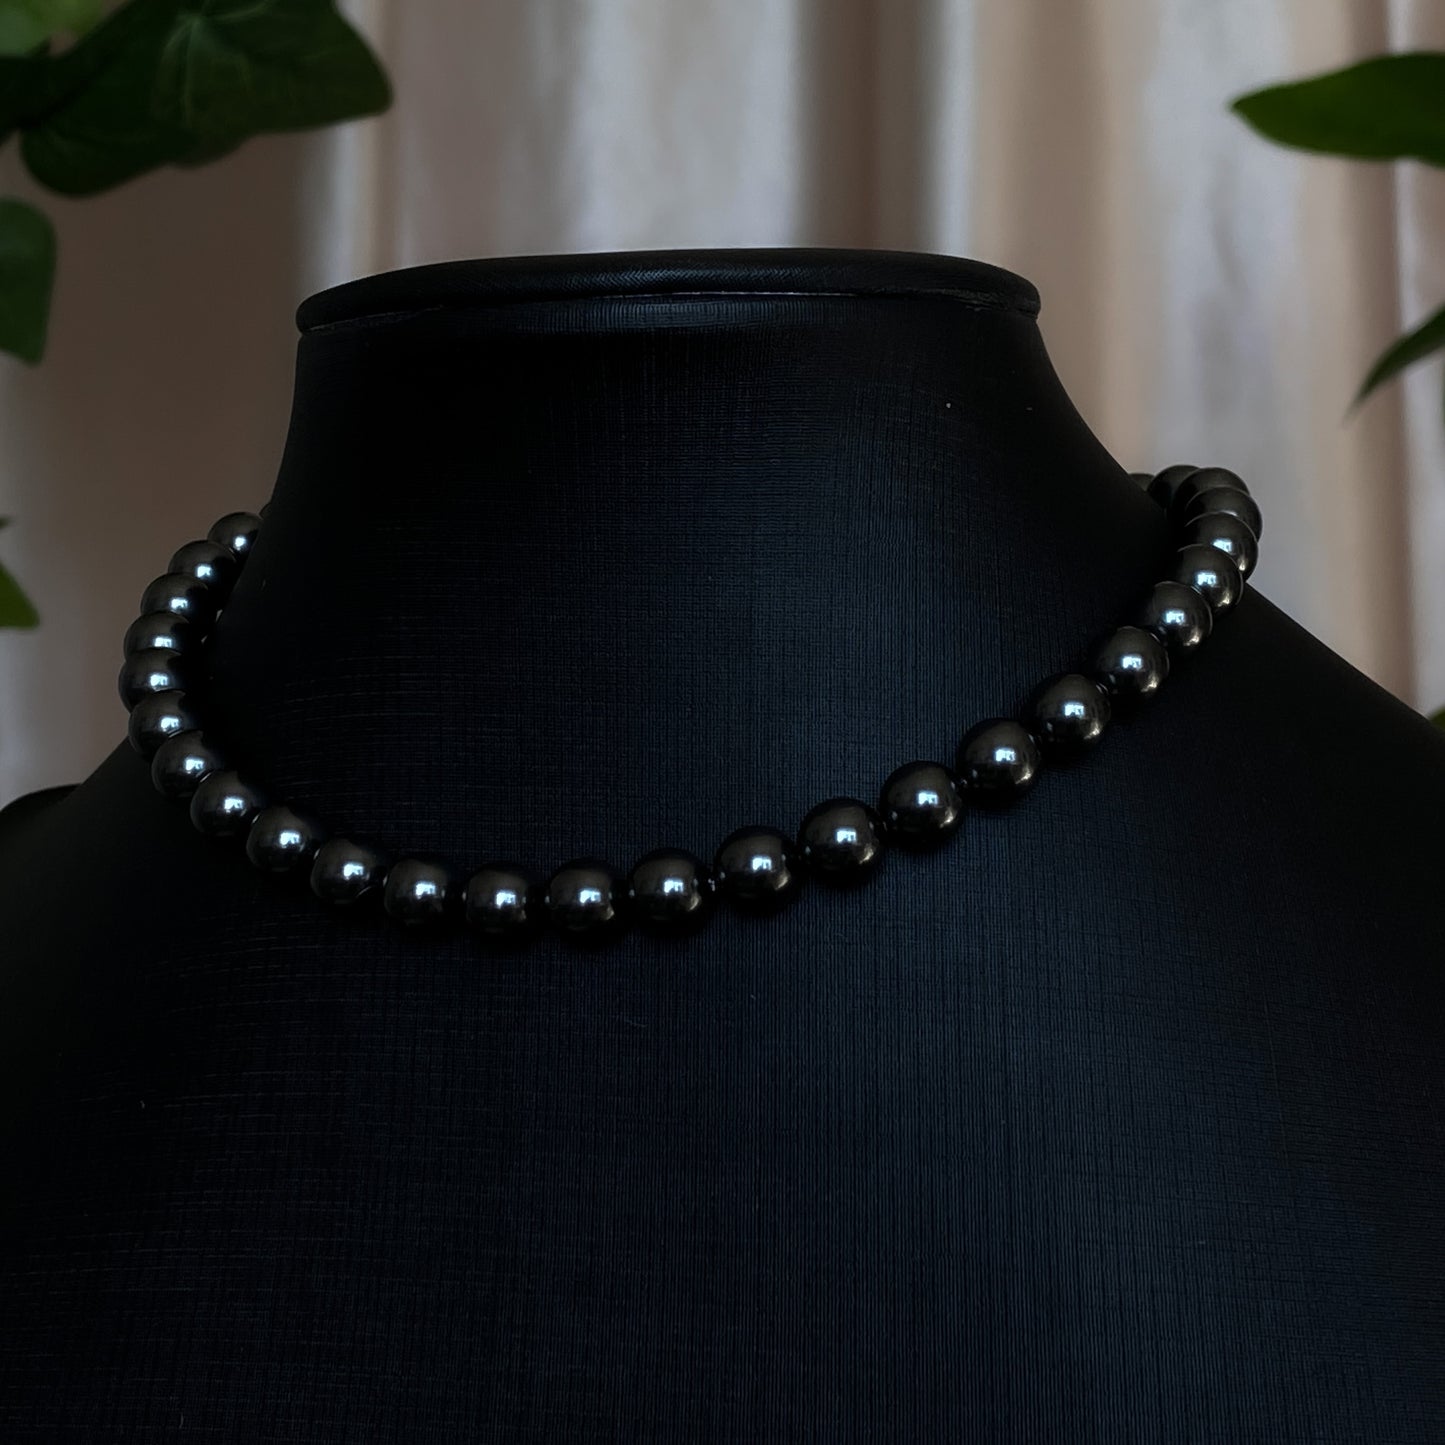 Tara ~ Dark Siren Black Pearl Choker with Glass Pearls, Antique Silver Shells and Stainless Steel